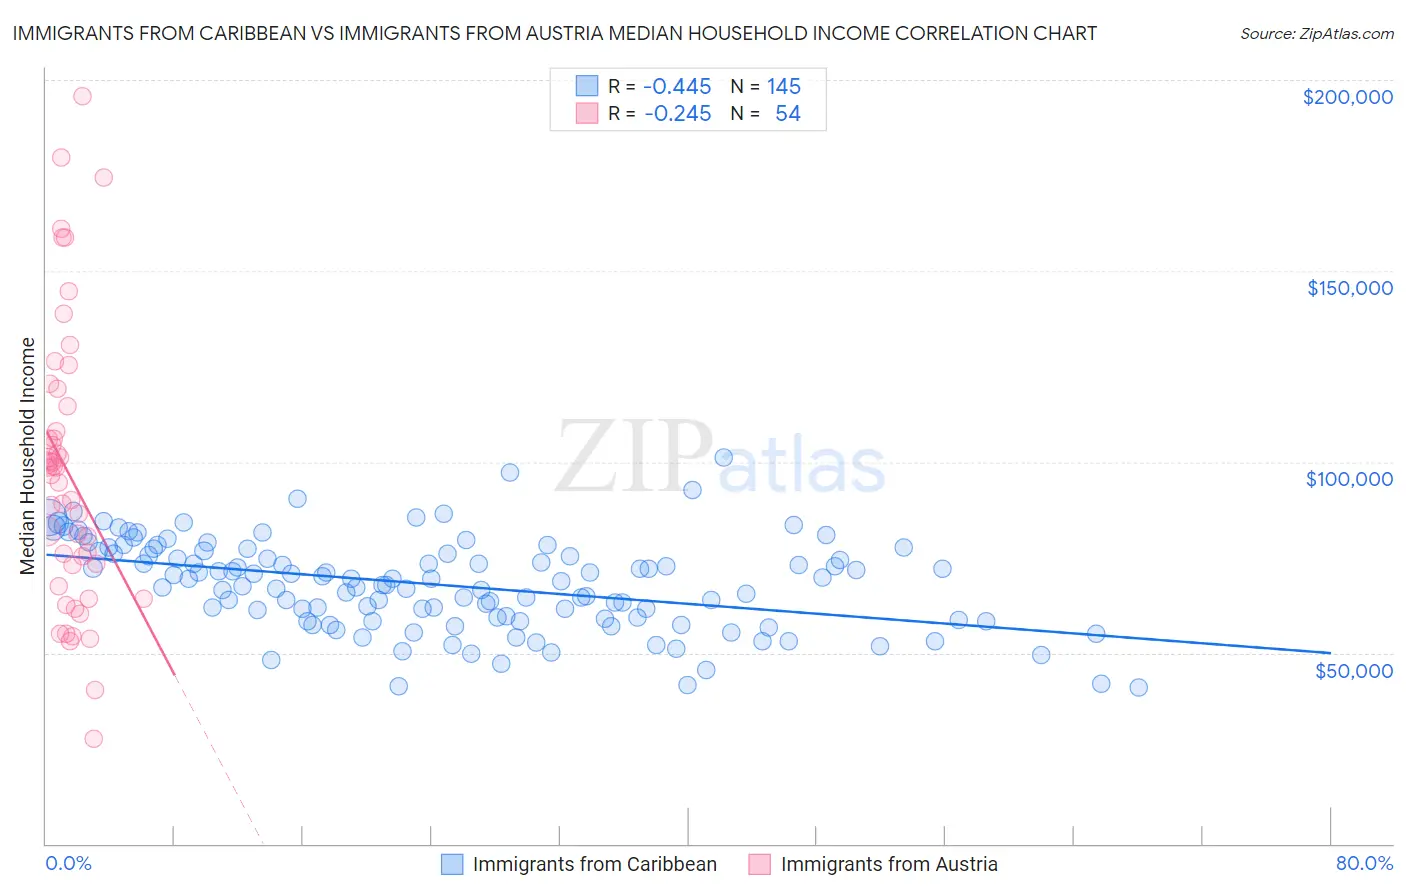 Immigrants from Caribbean vs Immigrants from Austria Median Household Income